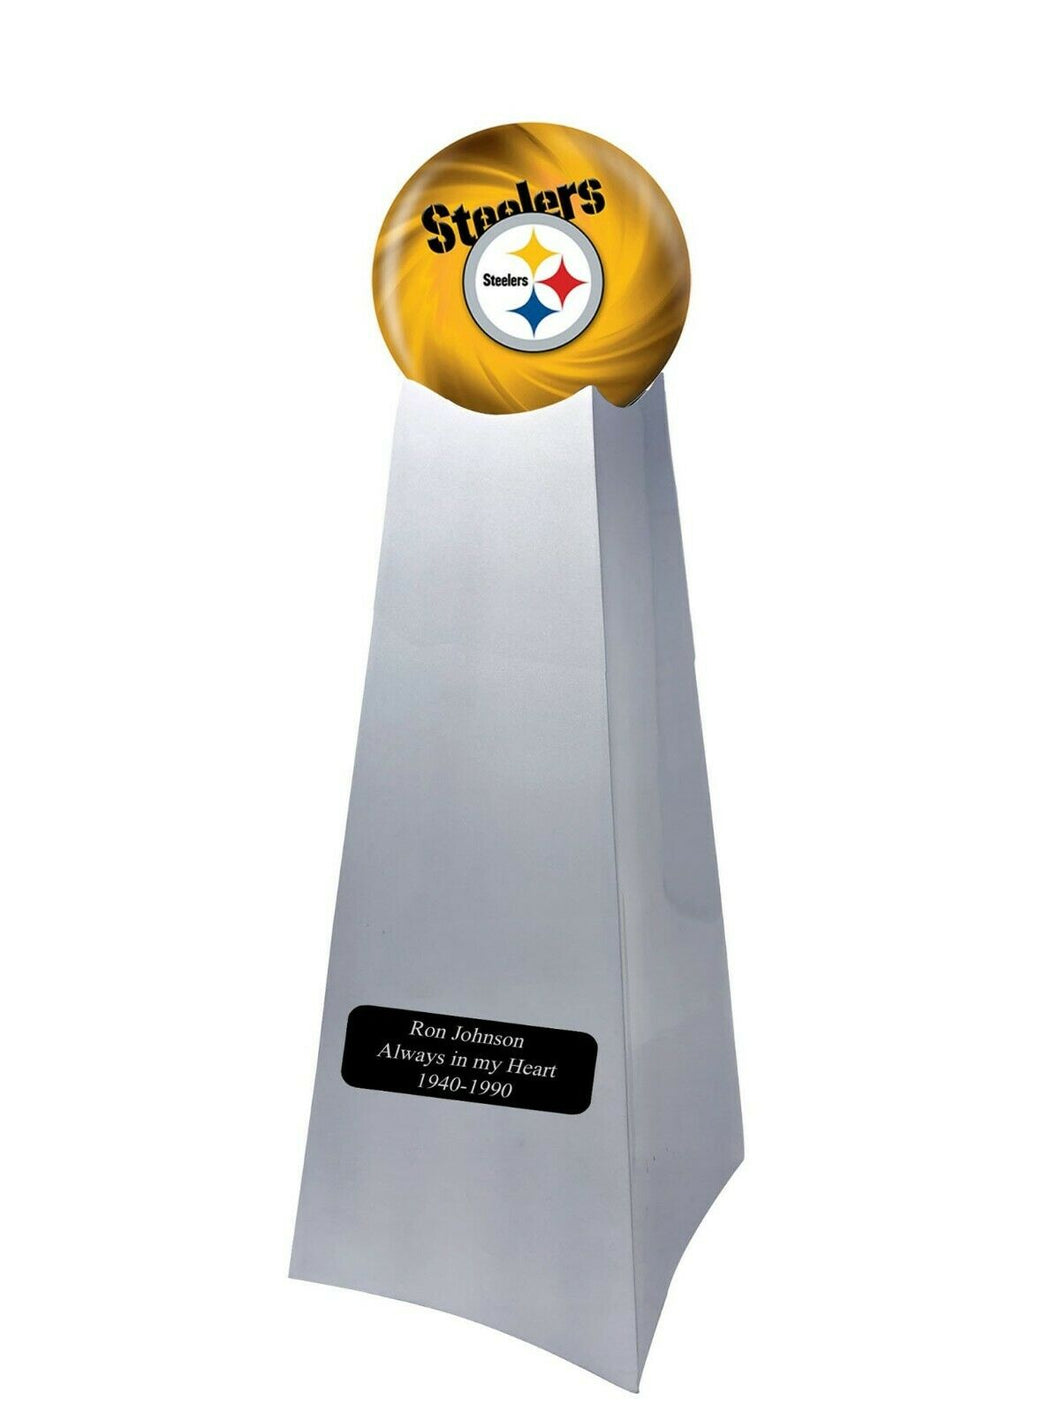 Pittsburgh Steelers Football Championship Trophy Large/Adult Cremation Urn 200 Cubic Inches